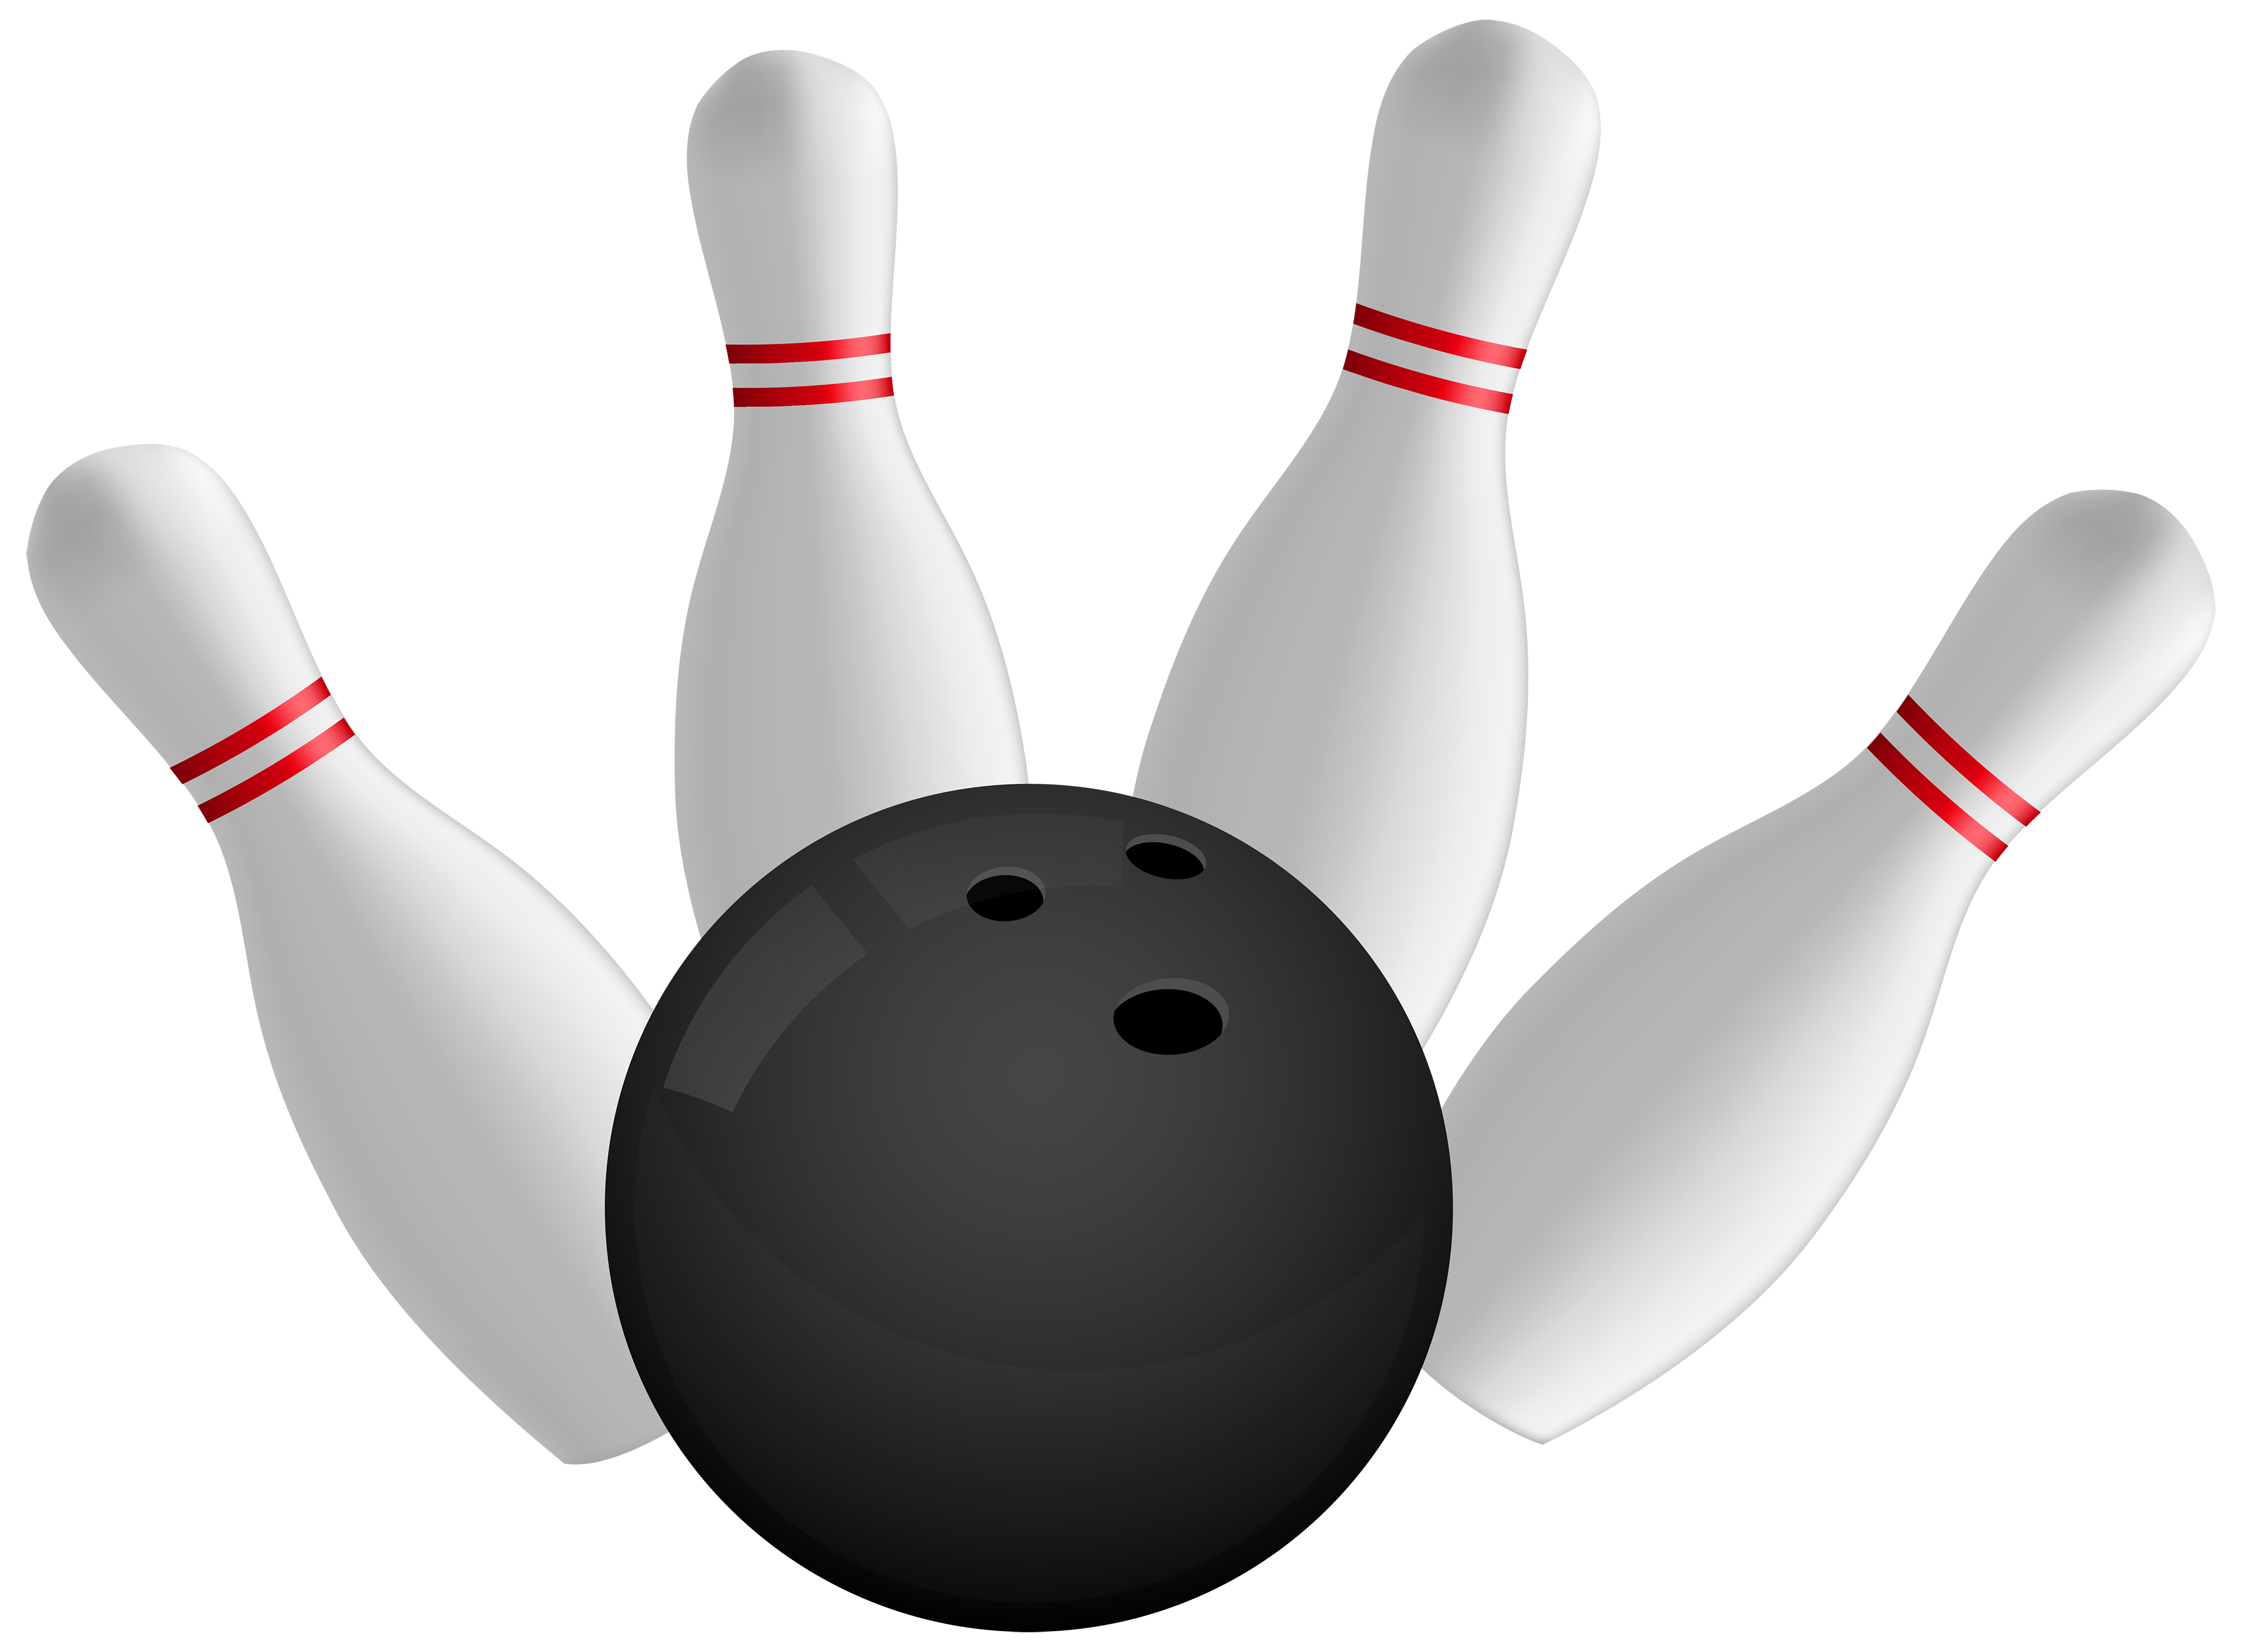 Bowling alley clipart 3 bowling clip art images free for 3